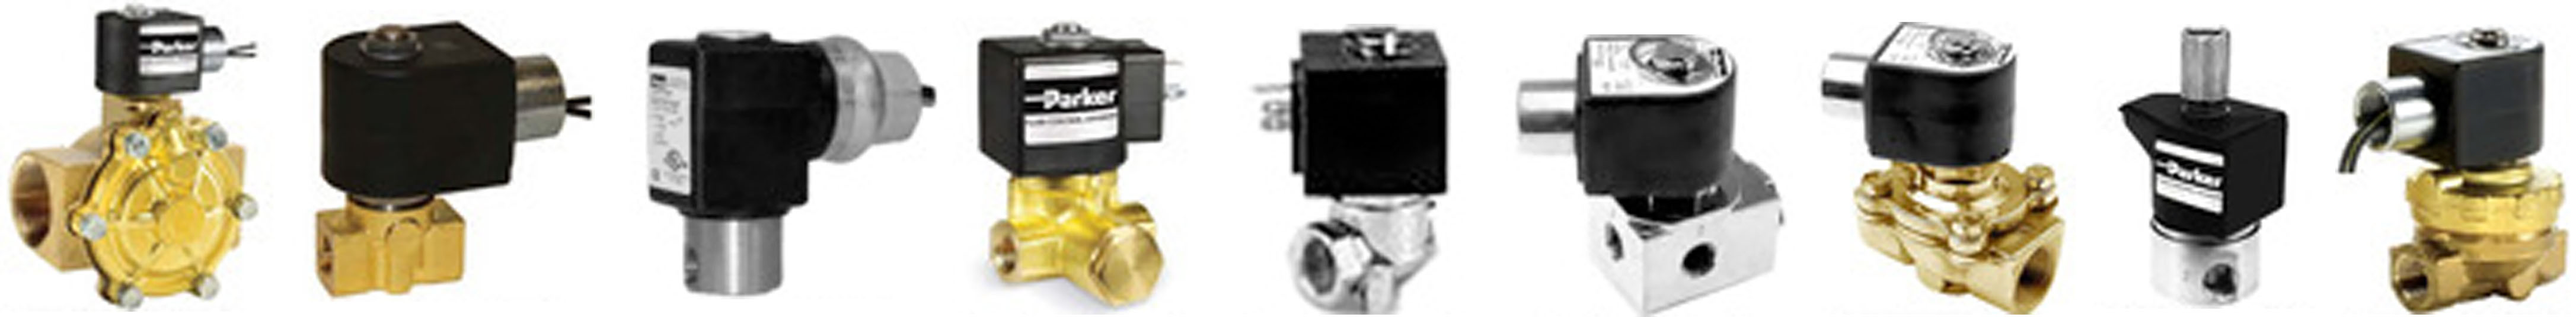 electrically-actuated-valves-family-photo